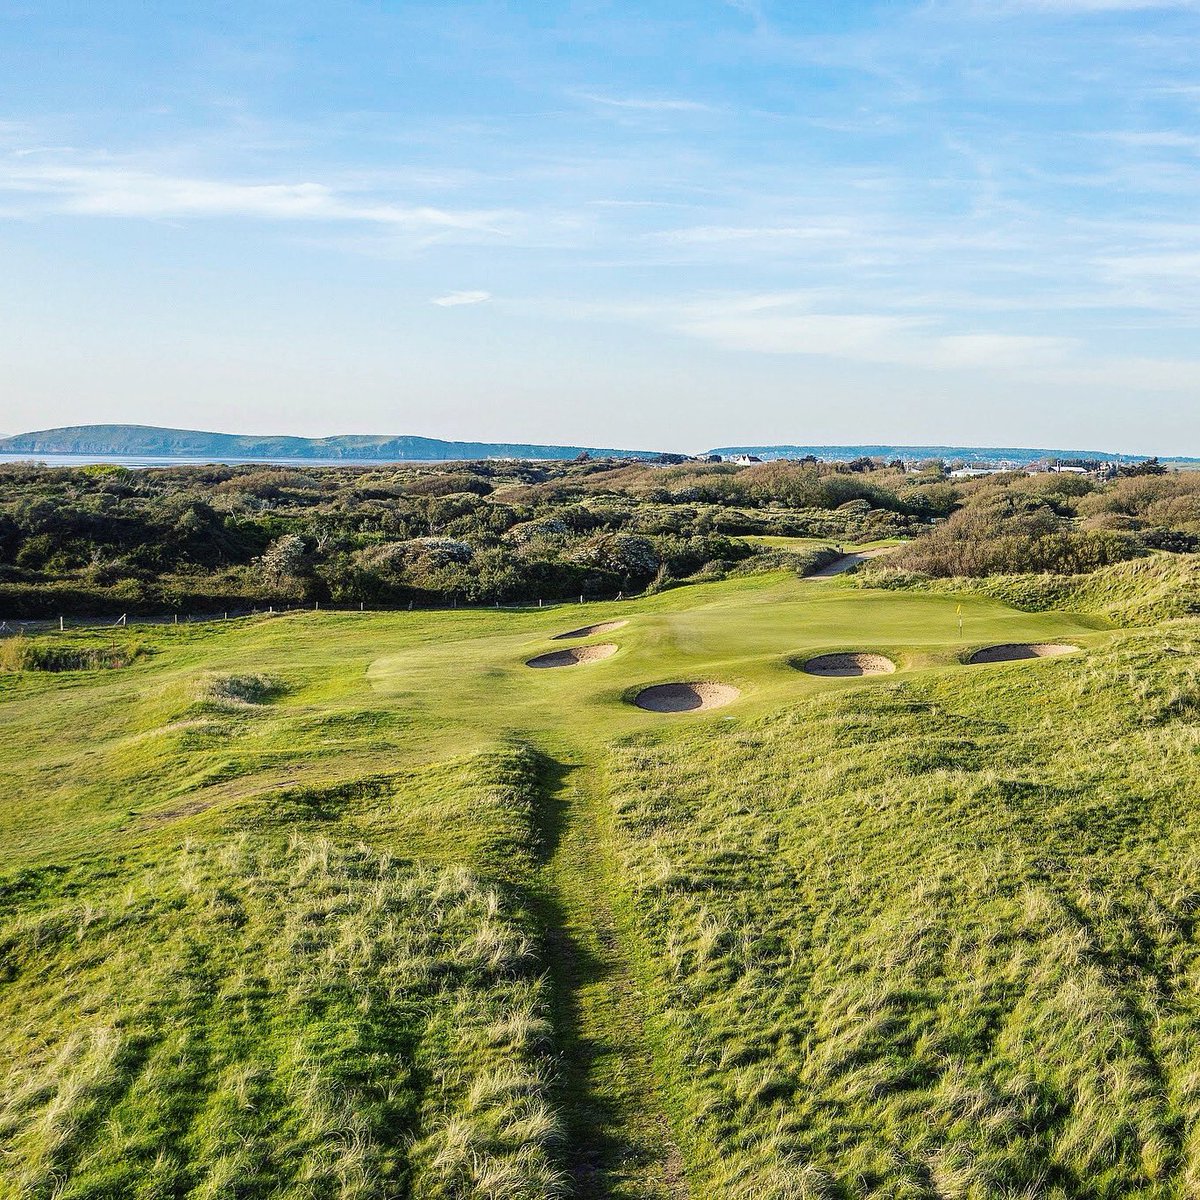 Side on view of the 9th green on the Championship Course.

The 9th is a classic example of a MacKenzie #par3 hole and was designed in conjunction with #harrycolt 

#golfcoursearchitecture #linksgolf #golfcoursedesign #burnhamonsea #somerset #golfcourseview #top100golfcourse